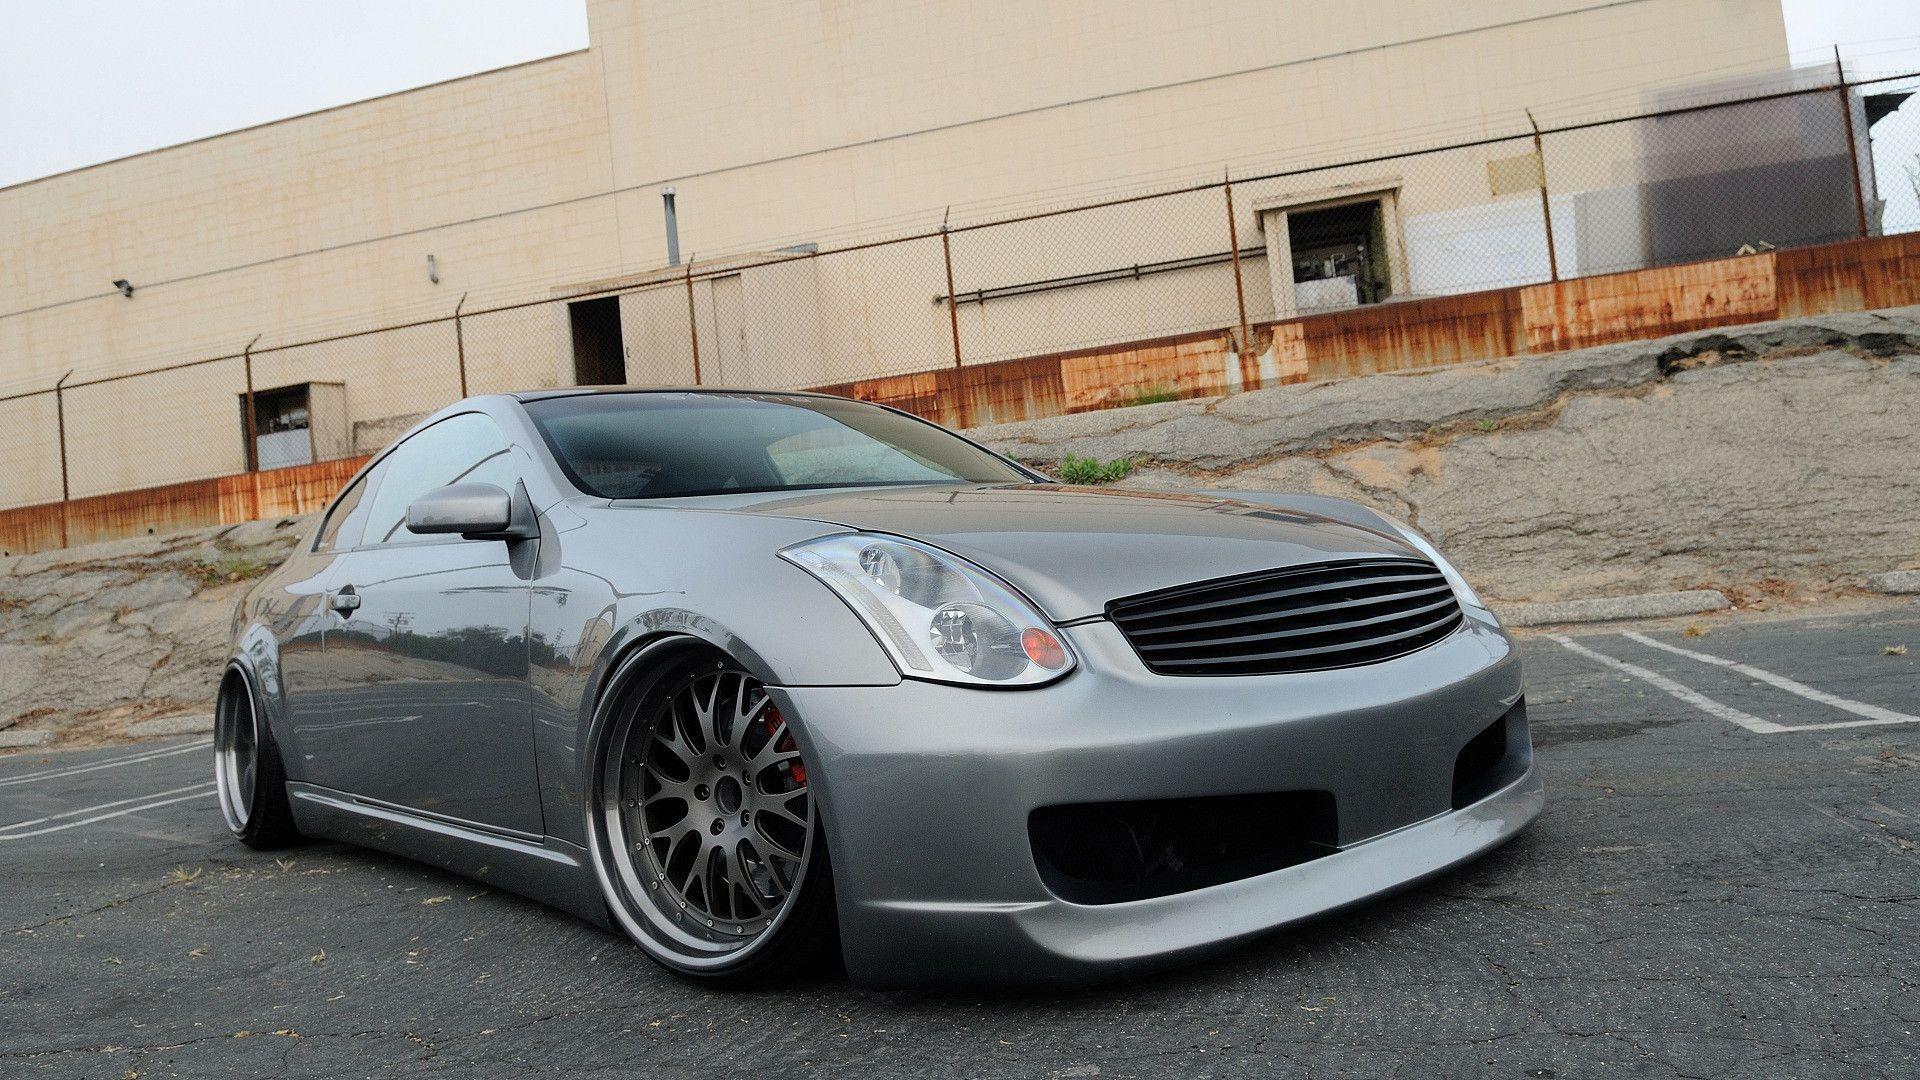 Free Slam and Tune Your G35 Wallpaper, Free Slam and Tune Your